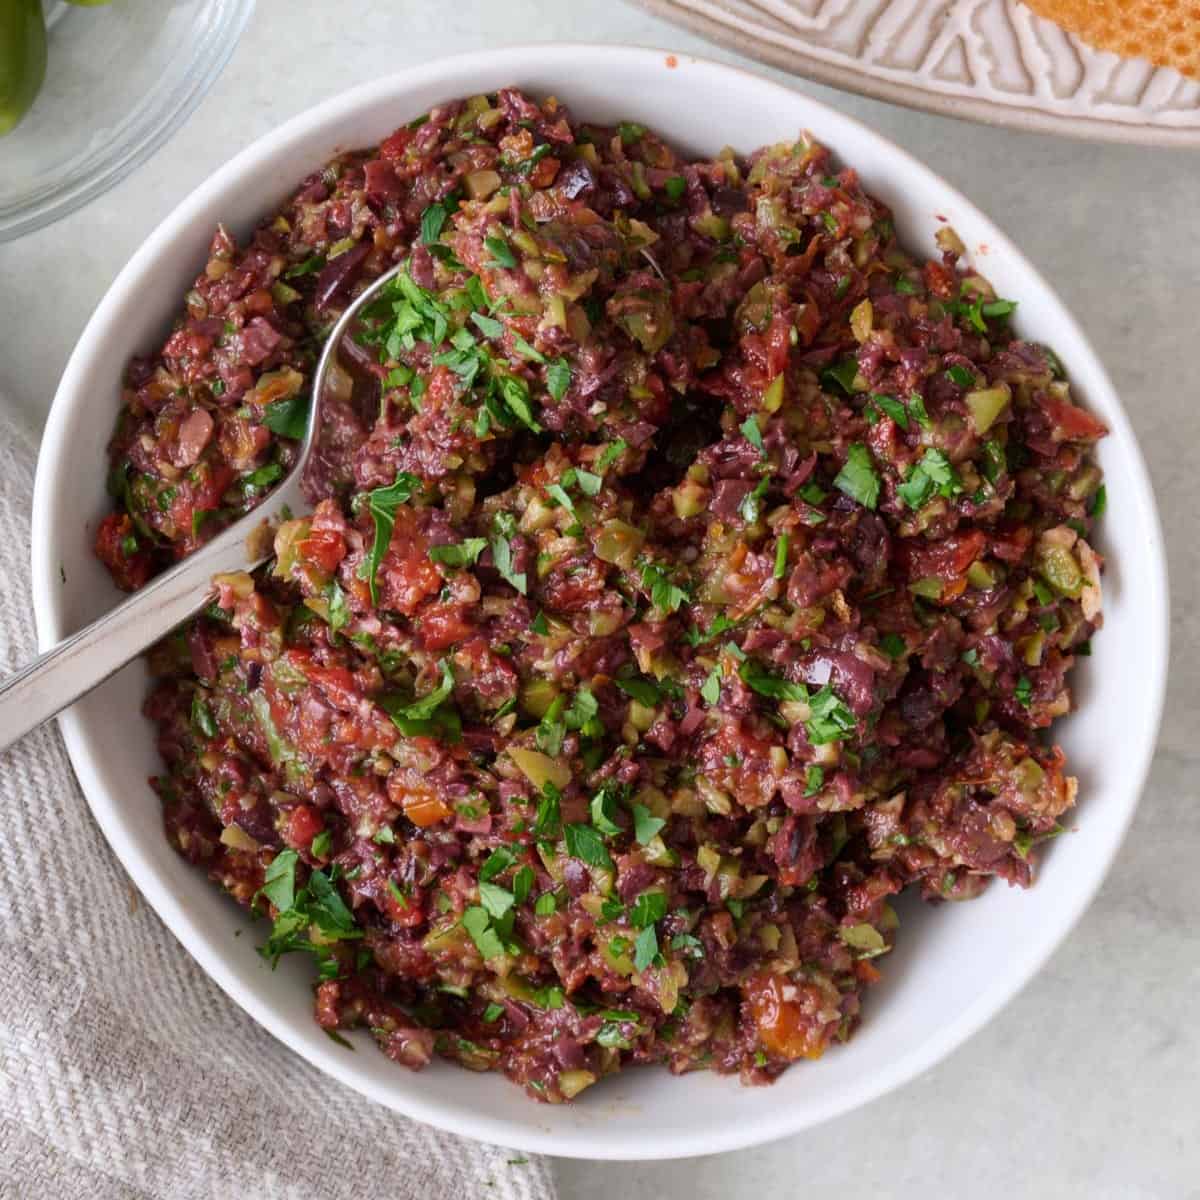 Olive tapenade in a bowl.